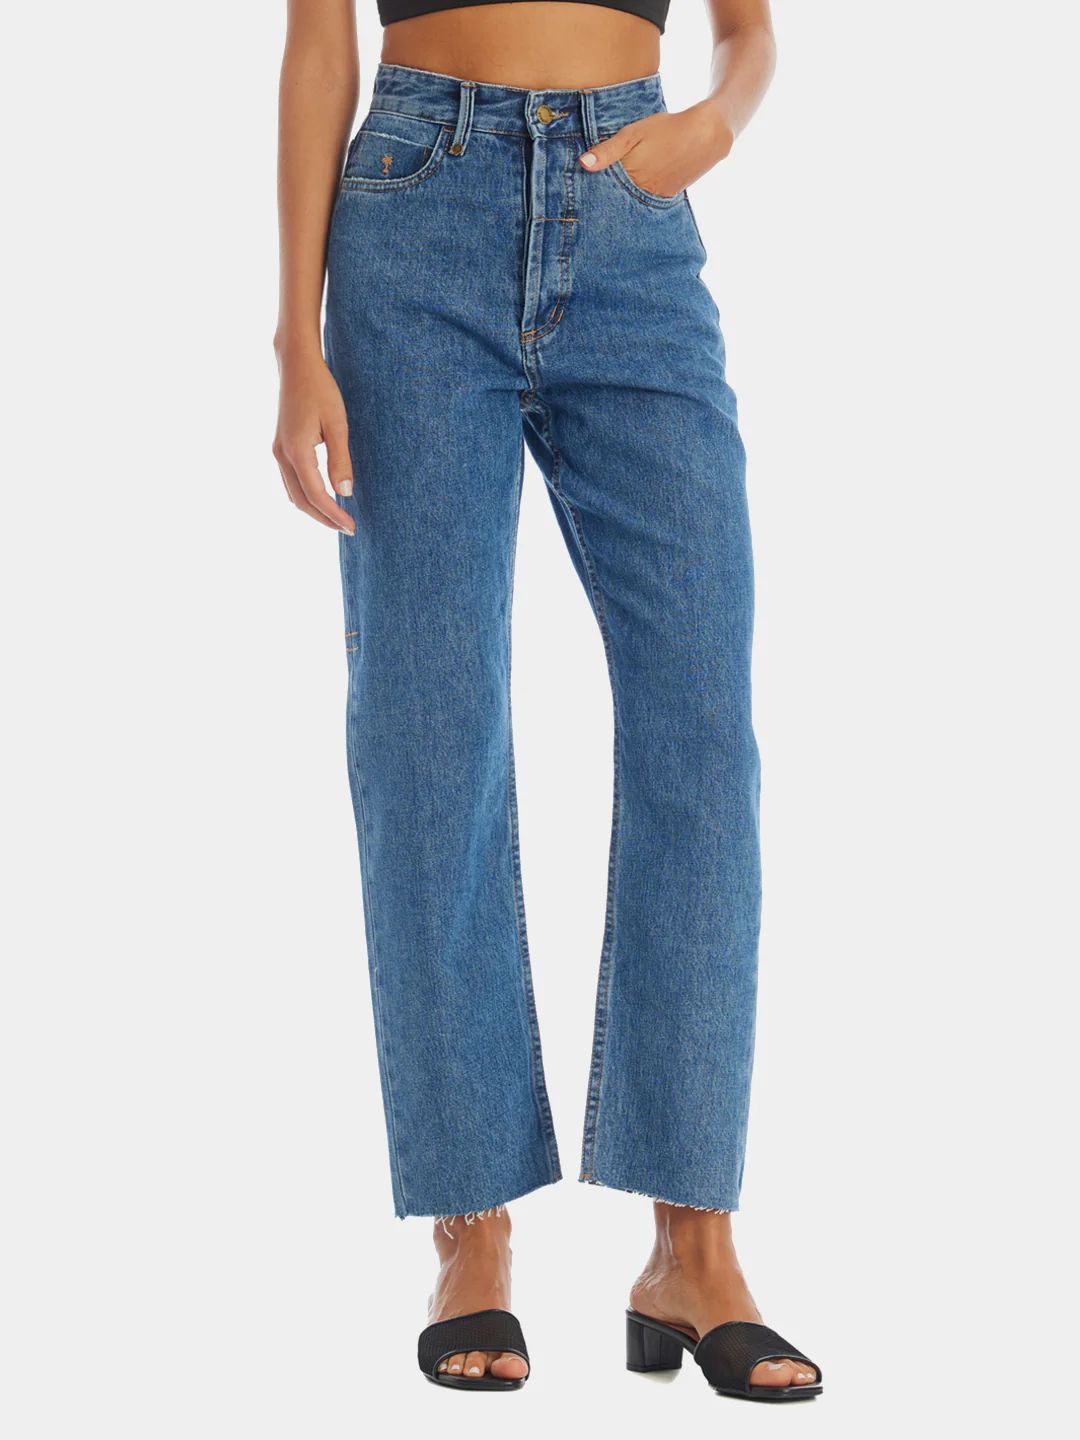 Thrills Women's Paige Jean in Highway Blue 28 Lord & Taylor | Lord & Taylor